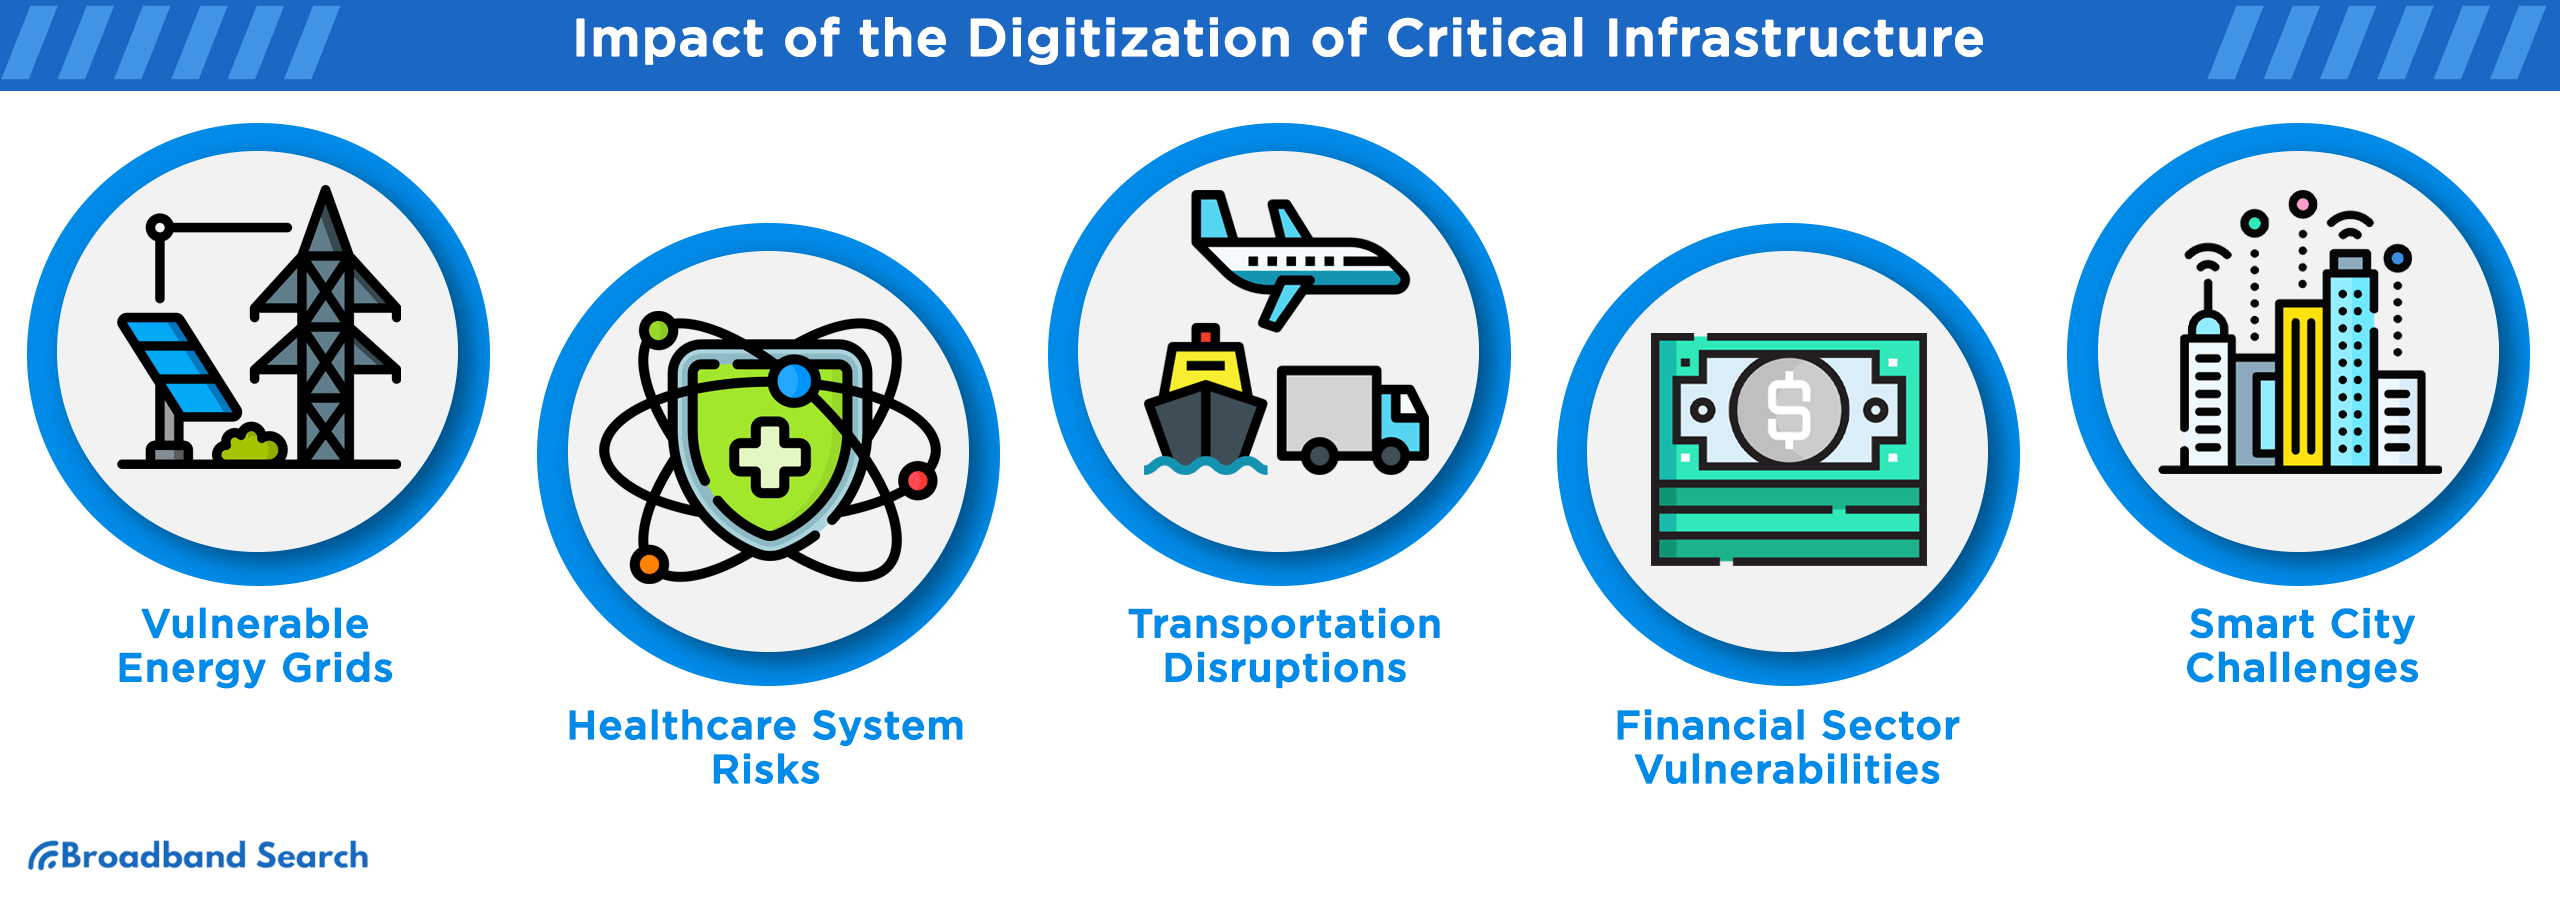 impact of the digitization of critical infrastructure